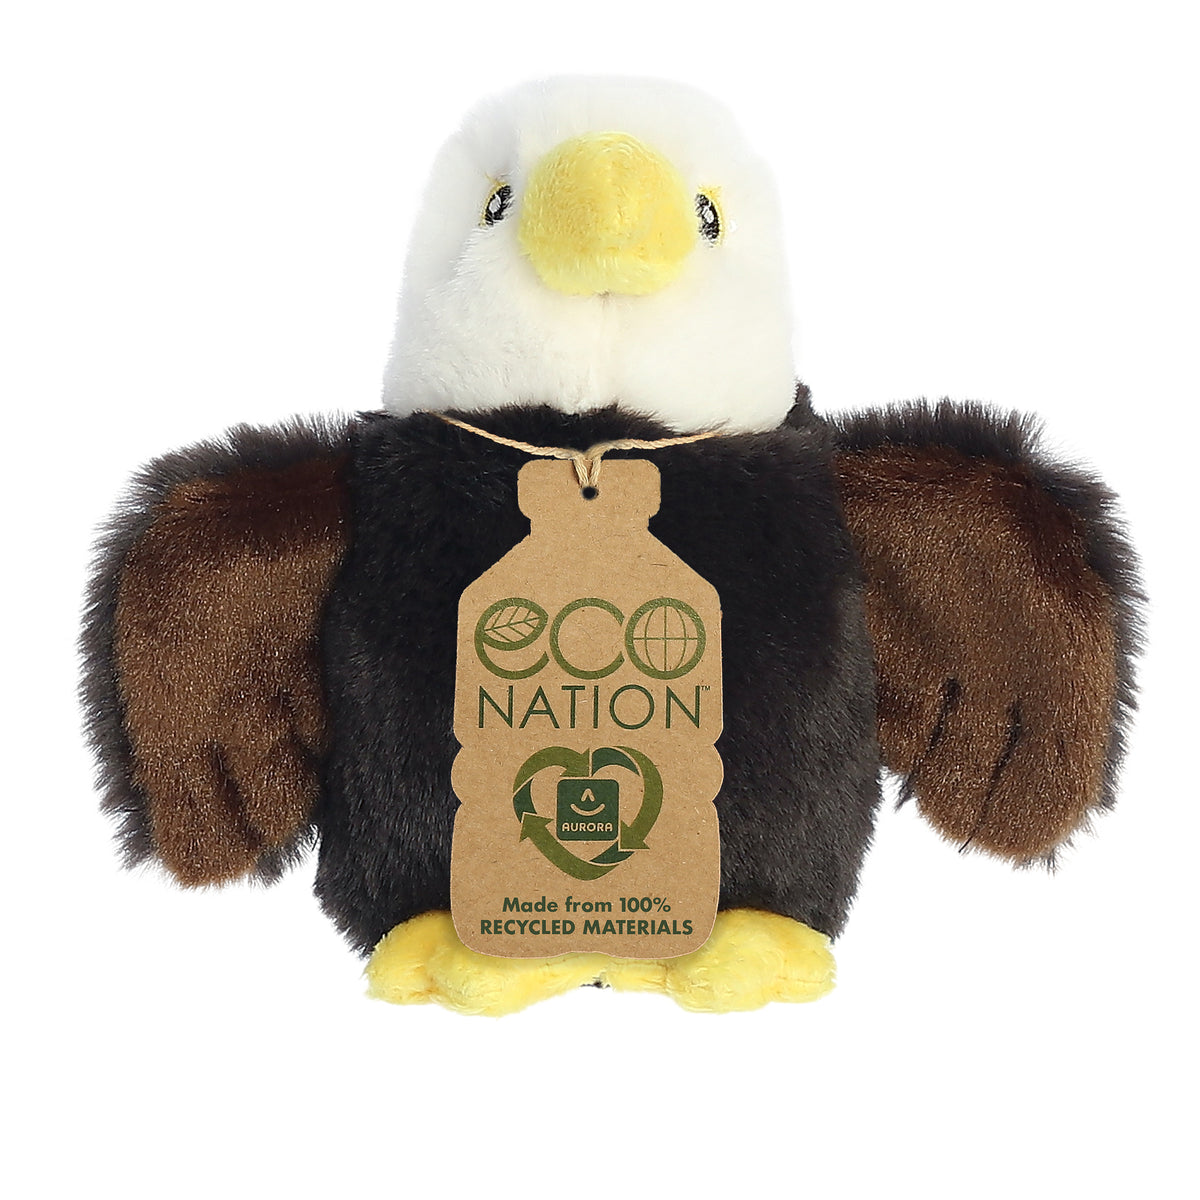 A charming eagle plush with a brown and white coat to resemble feathers with an eco-nation tag around its neck.